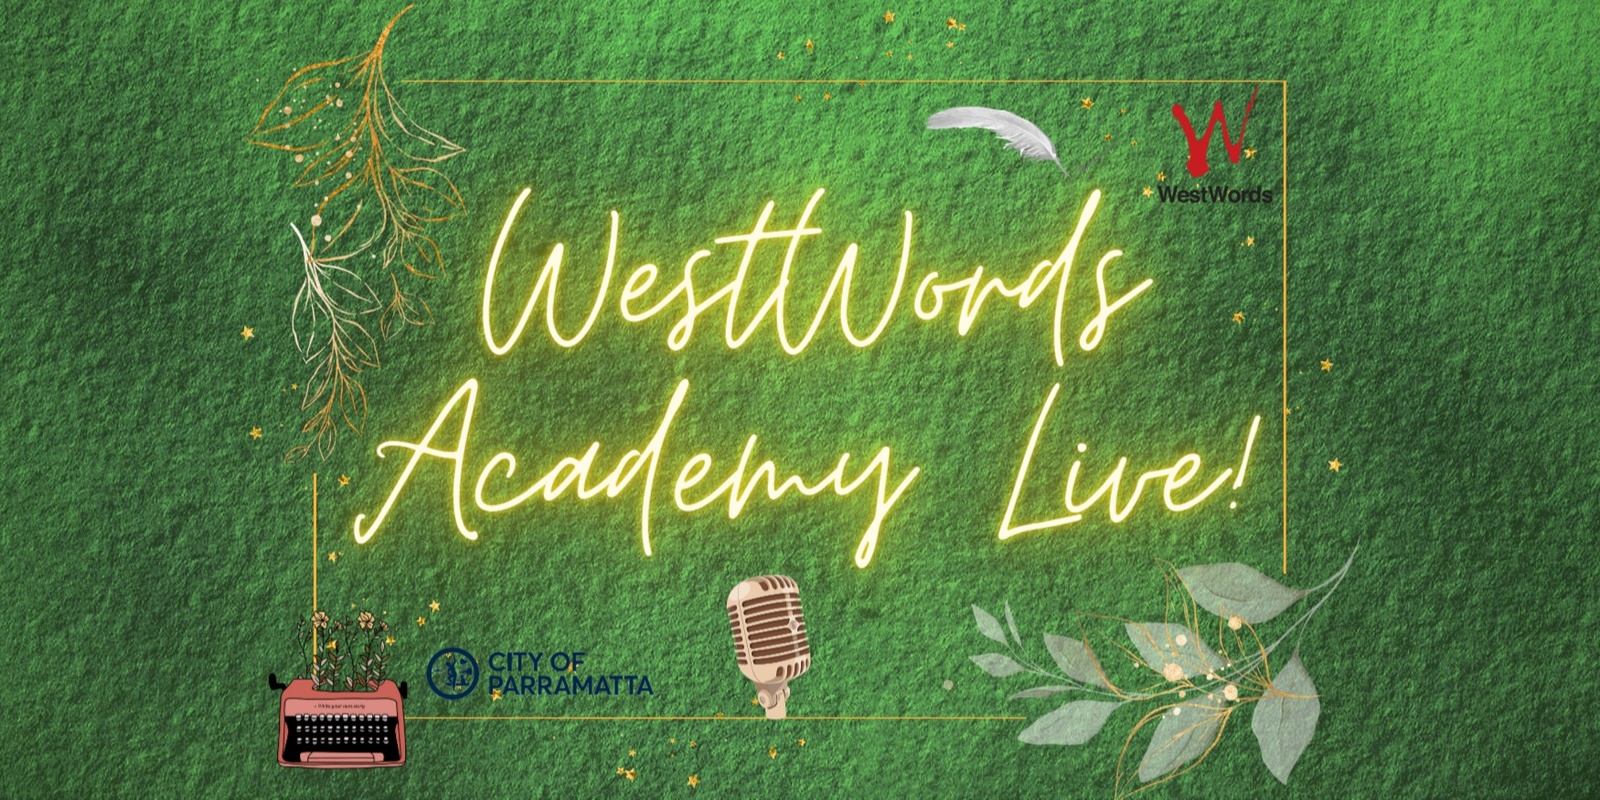 Banner image for Academy Live in July!